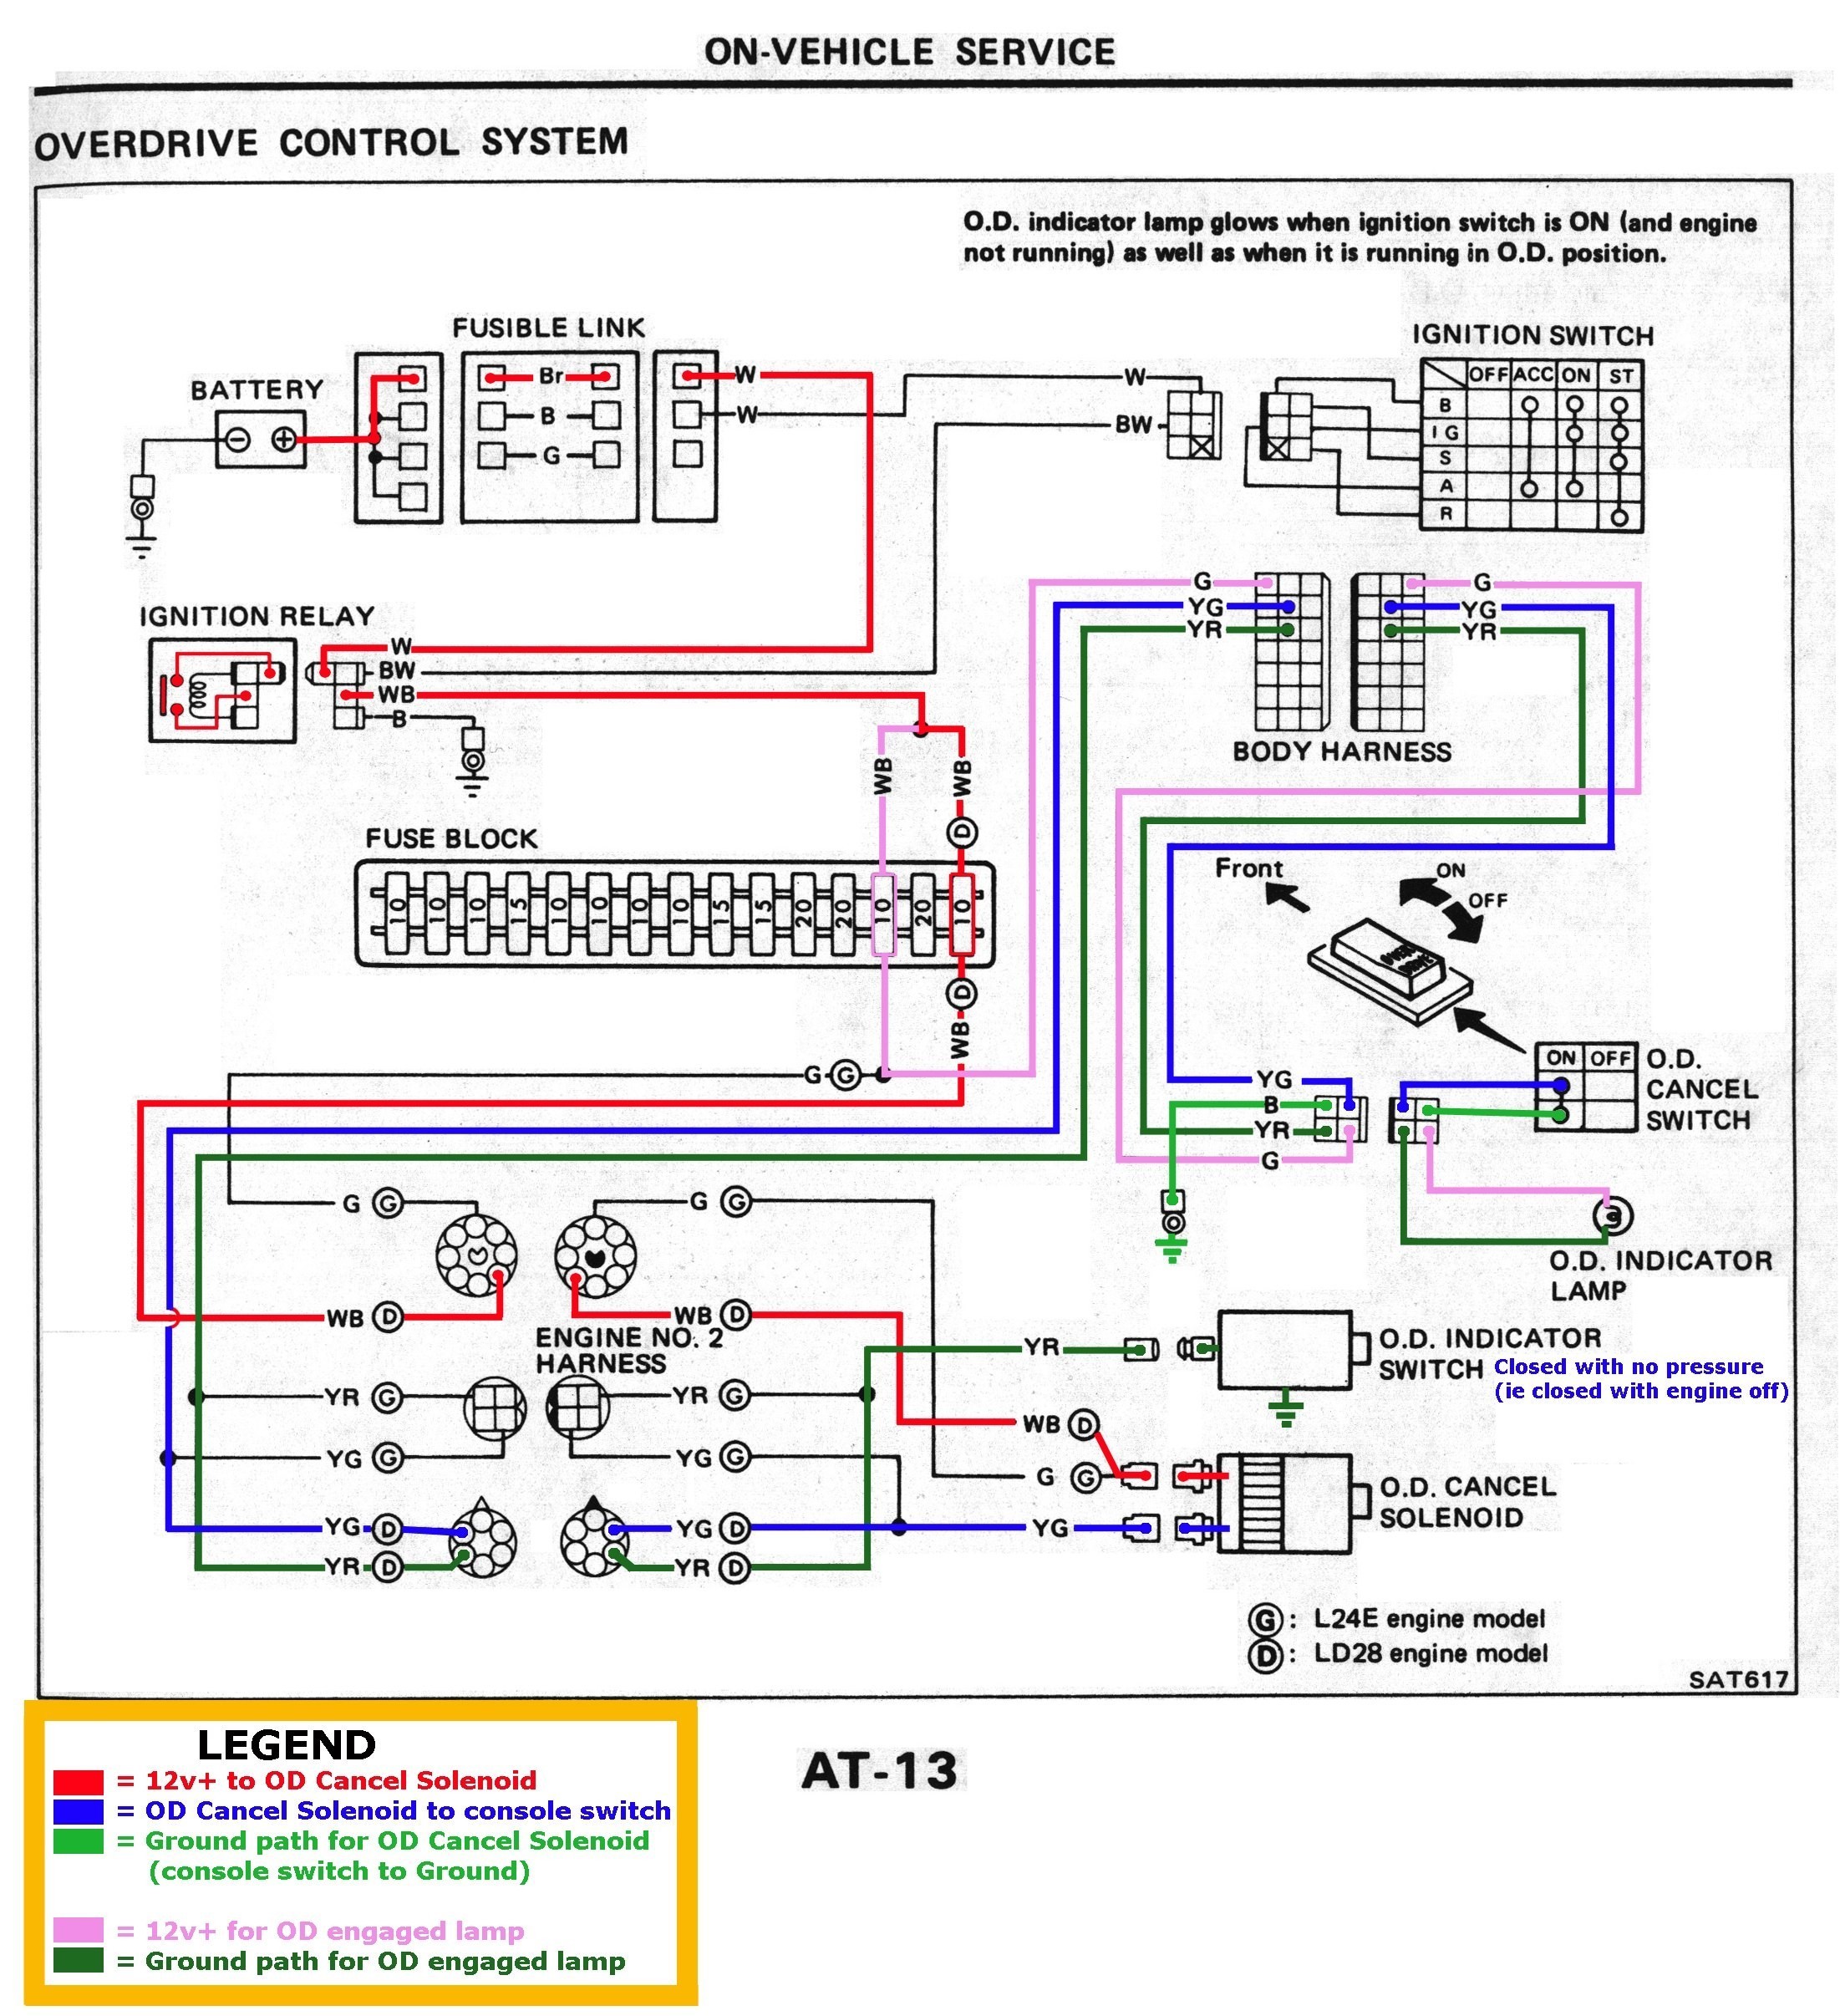 1995 Nissan Maxima Engine Diagram Take A Look About 2000 Nissan Maxima Engine with Awesome Gallery Of 1995 Nissan Maxima Engine Diagram